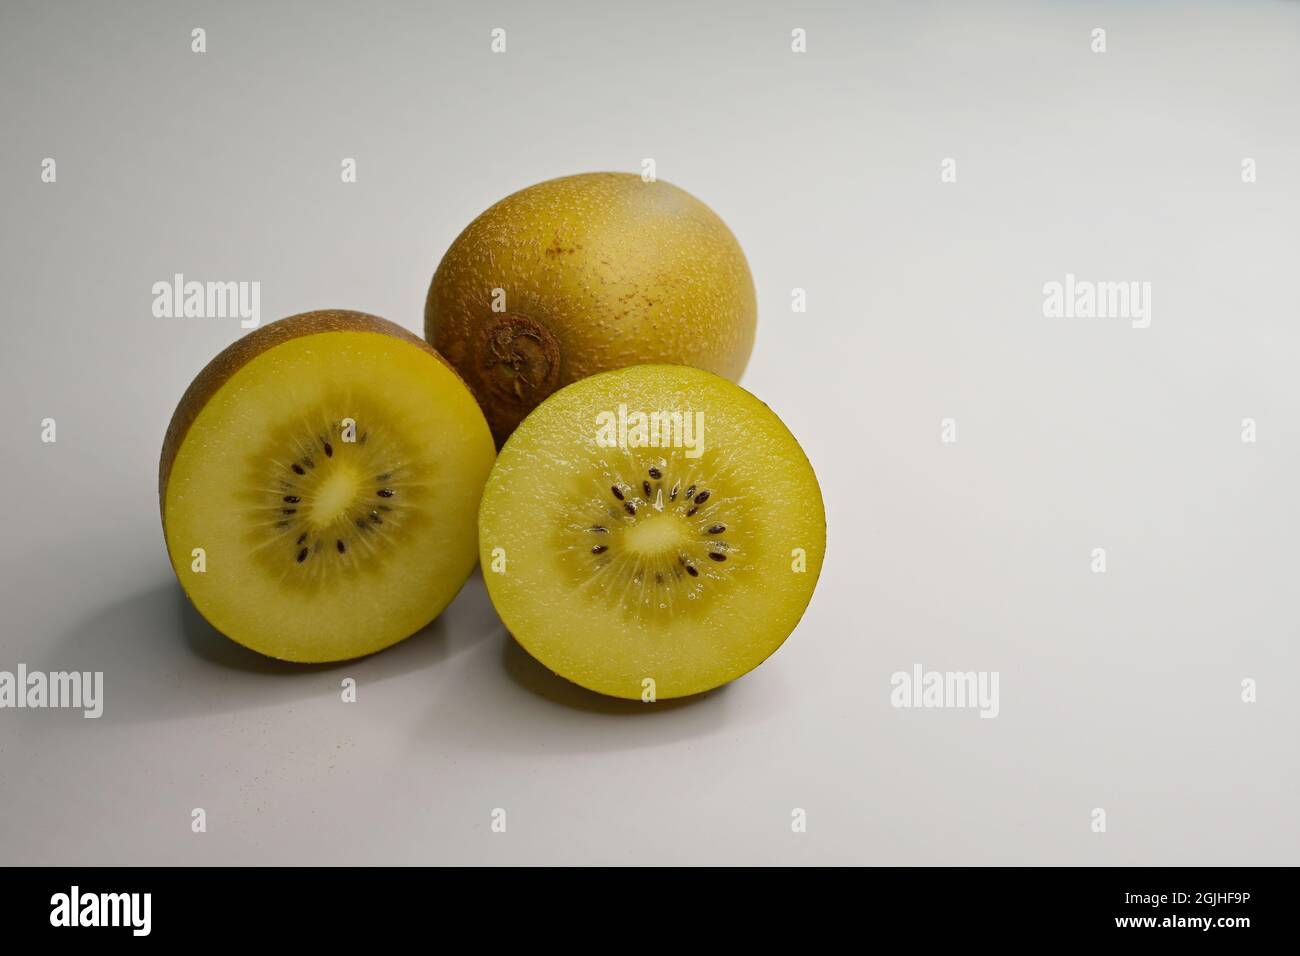 A Golden Kiwifruit or Chinese gooseberry (Actinidia chinensis) cut crosswise and a whole berry on white background Stock Photo